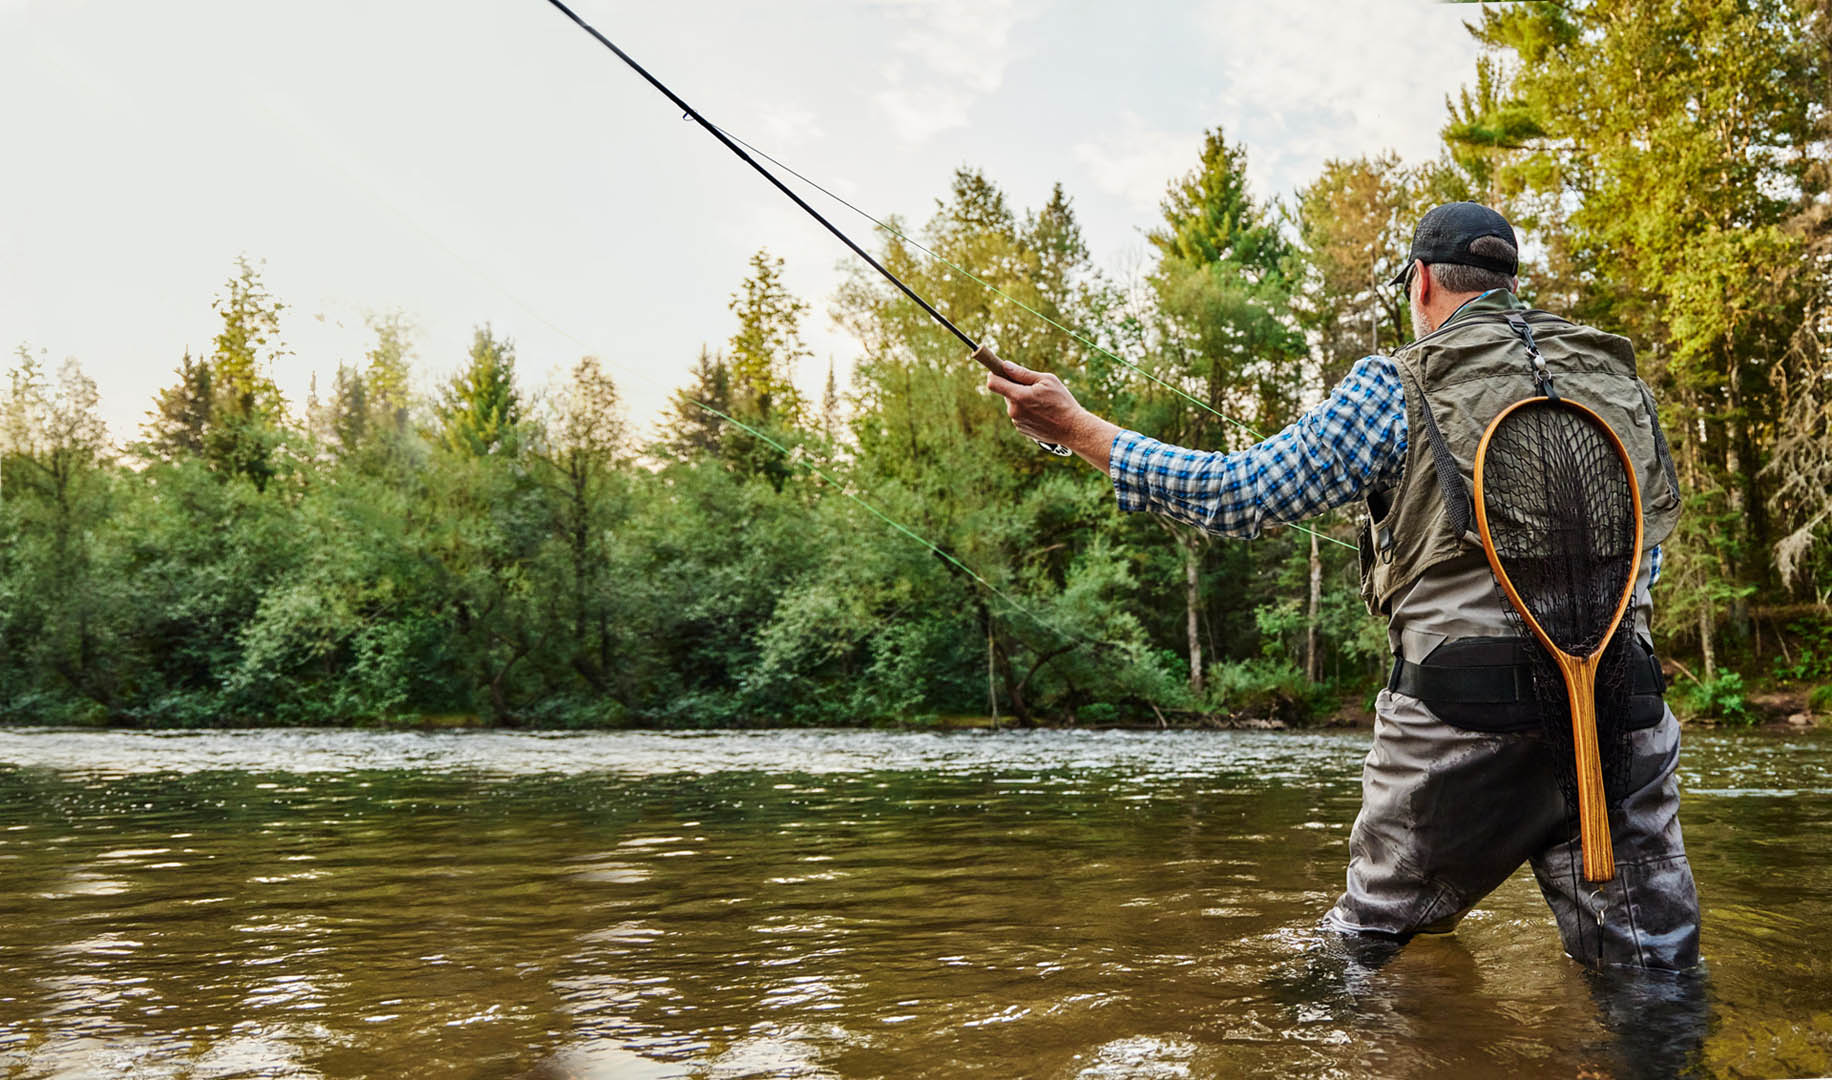 A man casting a fly fishing rod on a river surrounded by green trees.